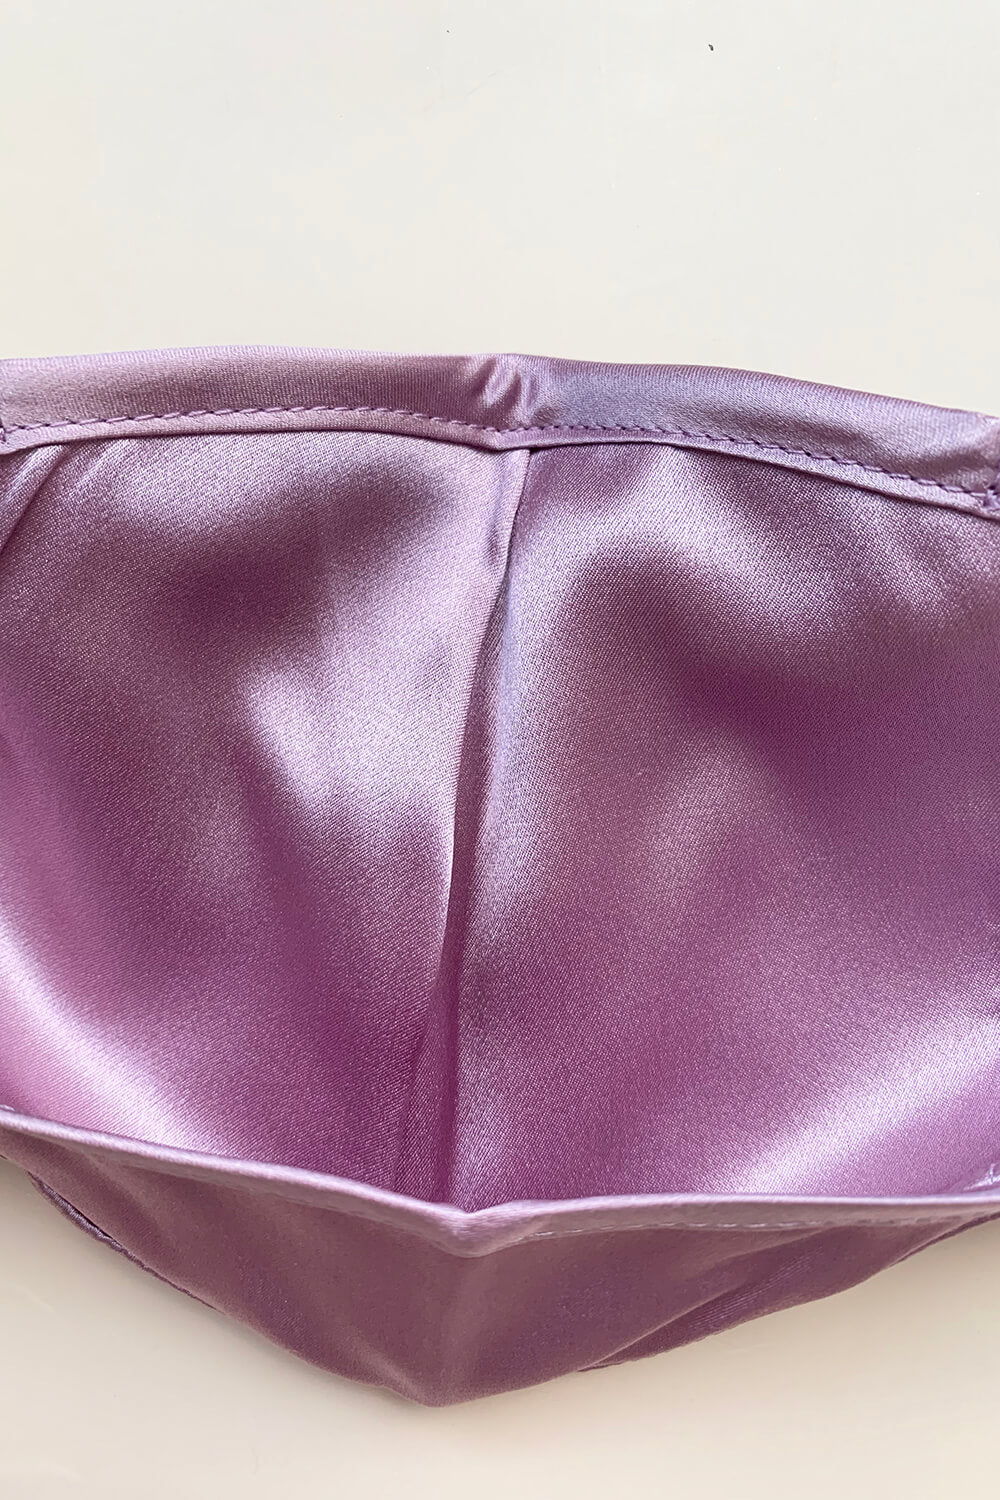 ULTRA Silk Face Mask - Lilac (with Filter Pocket and Nose Wire) - BASK™